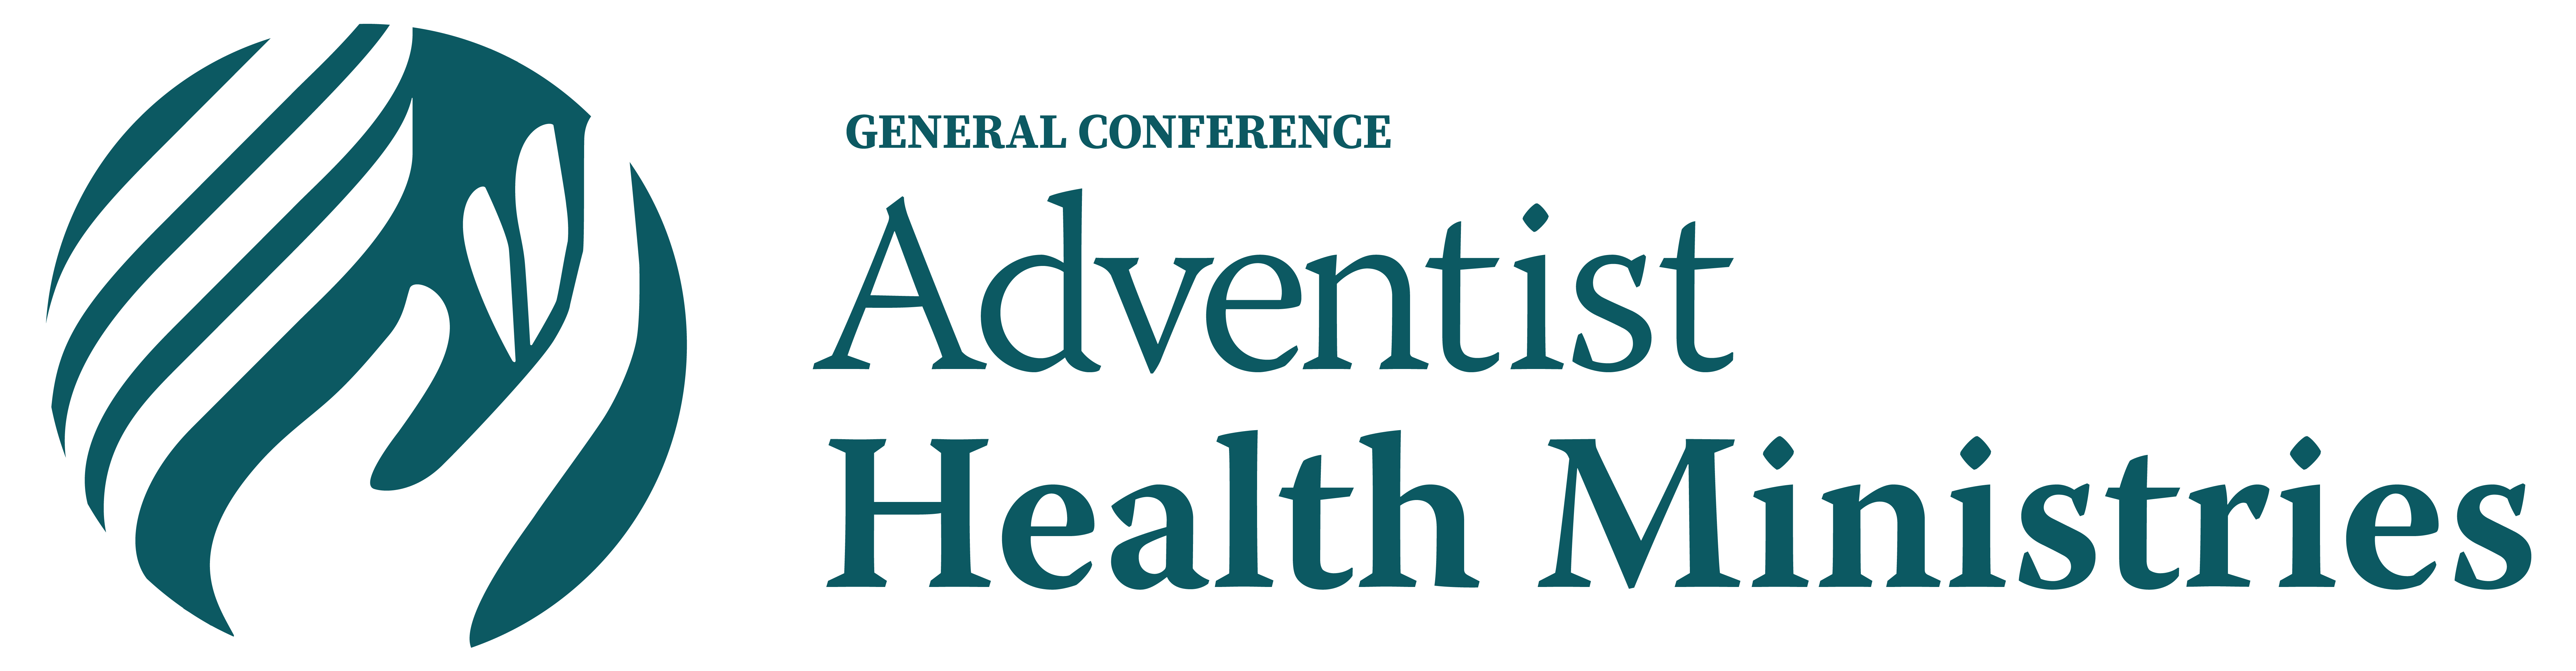 adventist health ministry general conference